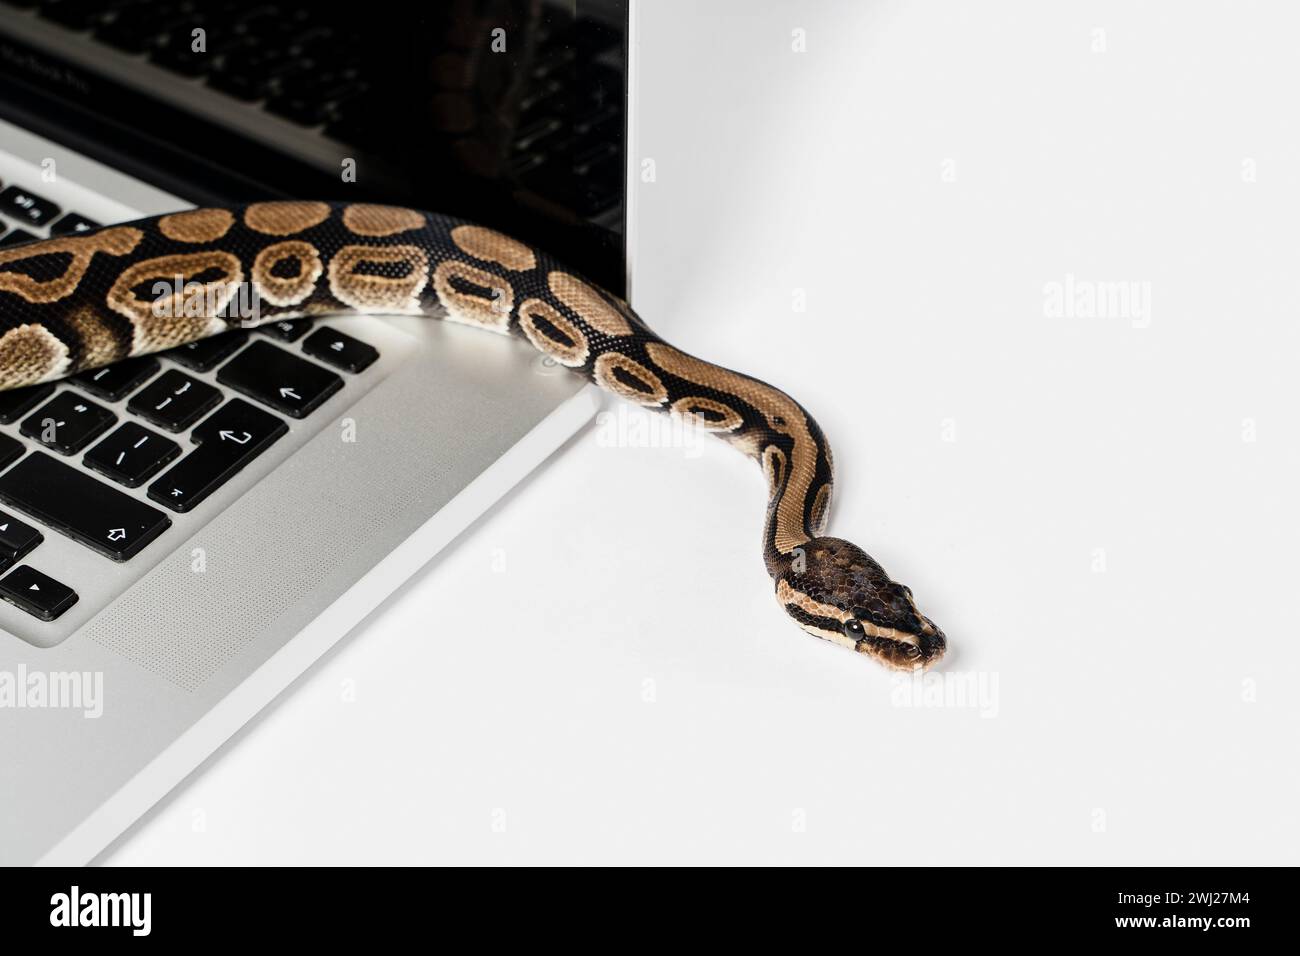 Python snake and laptop computer. Concept of using high-level programming language for software engineering. Stock Photo